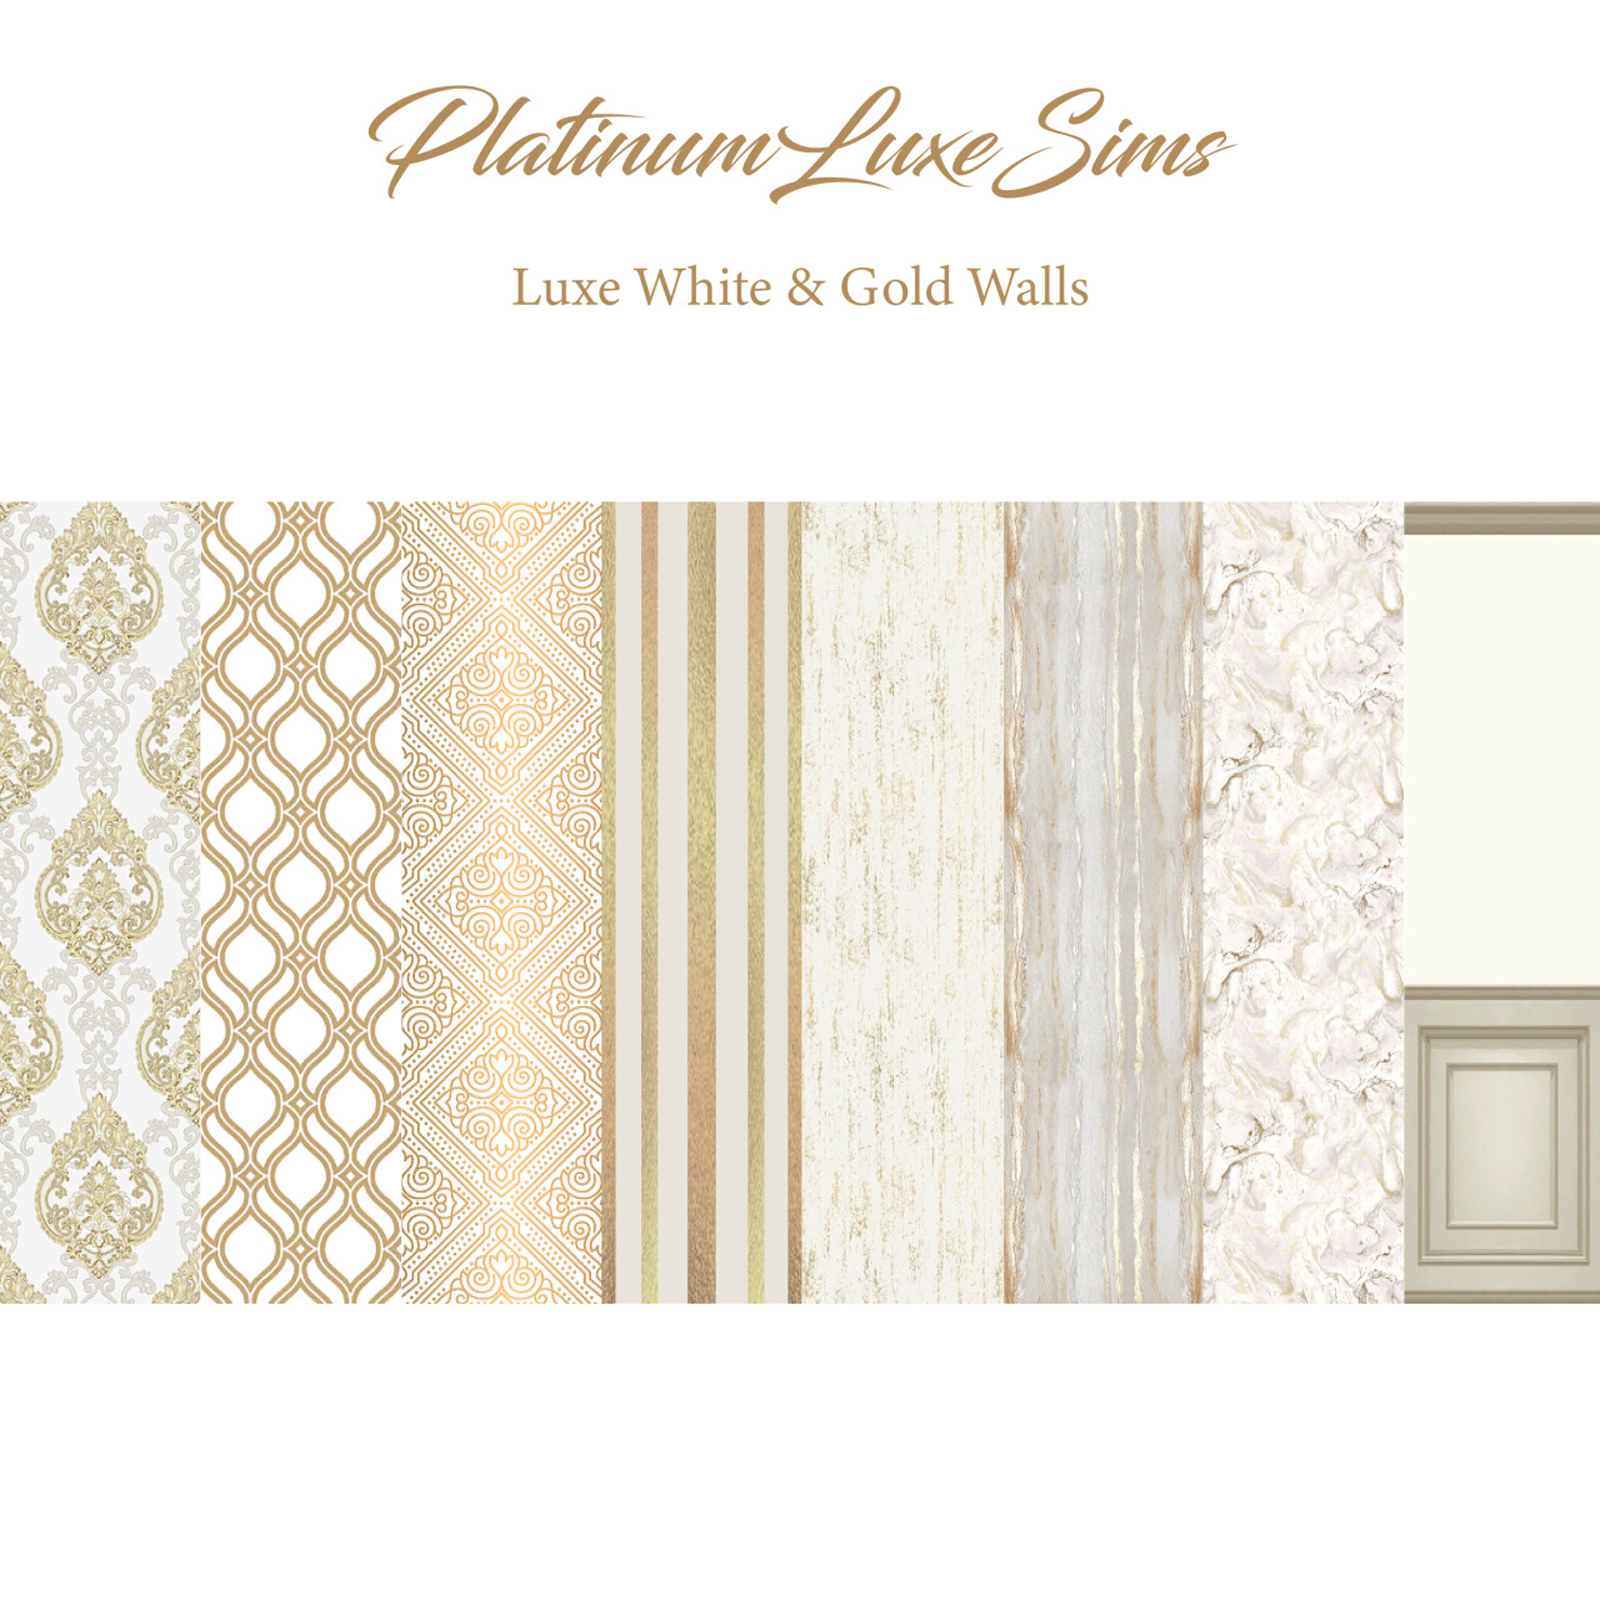 Luxe White & Gold Walls project avatar